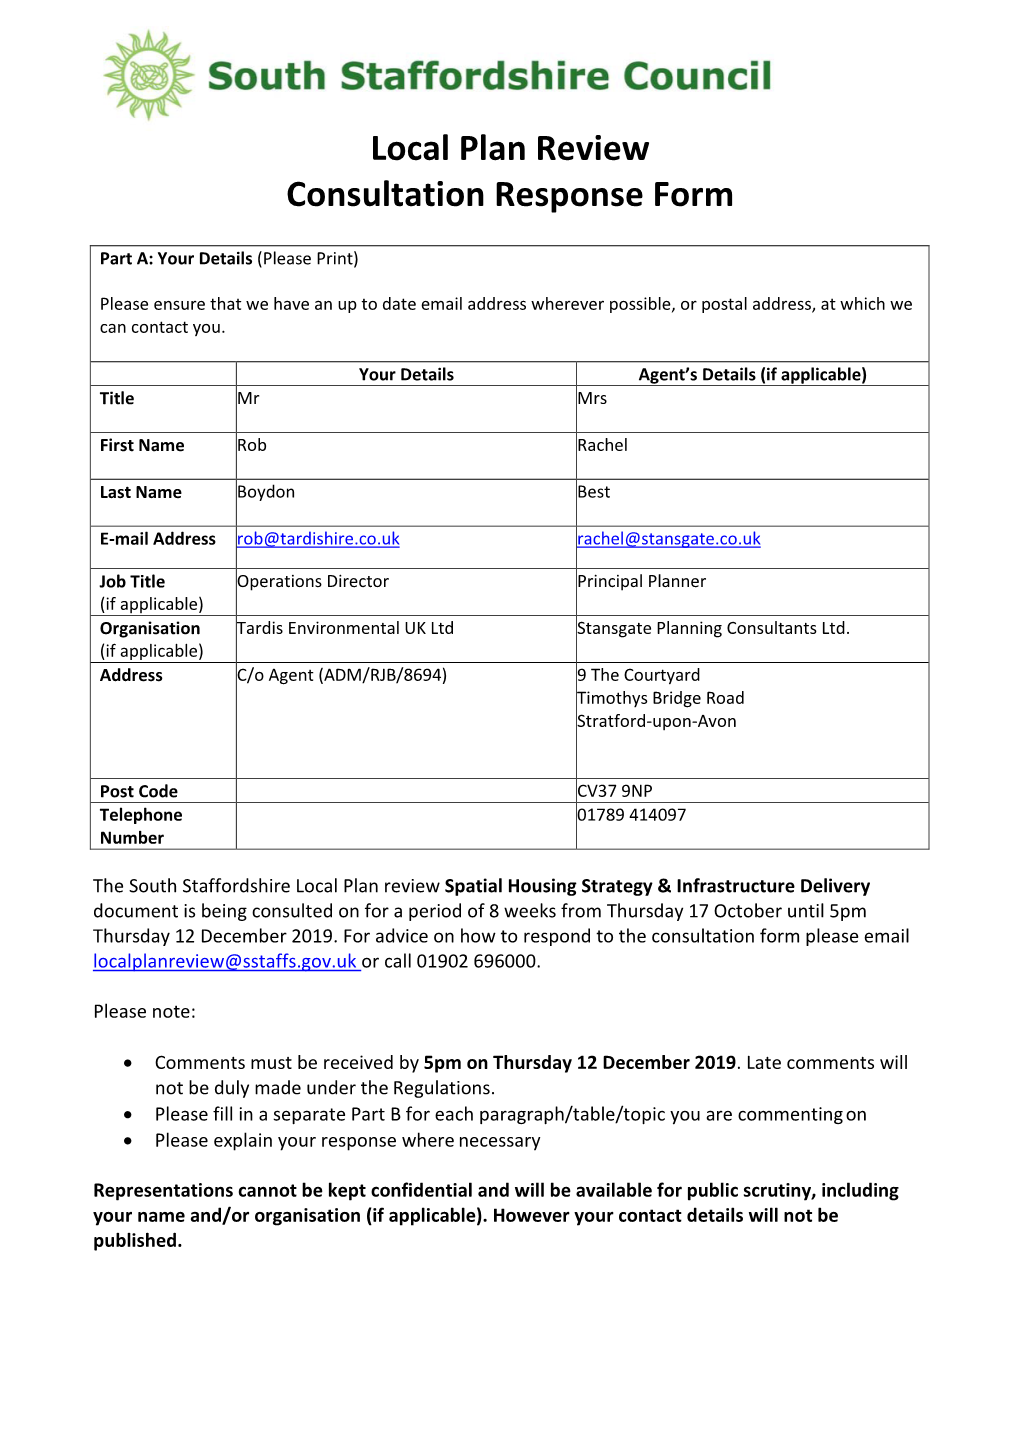 Local Plan Review Consultation Response Form